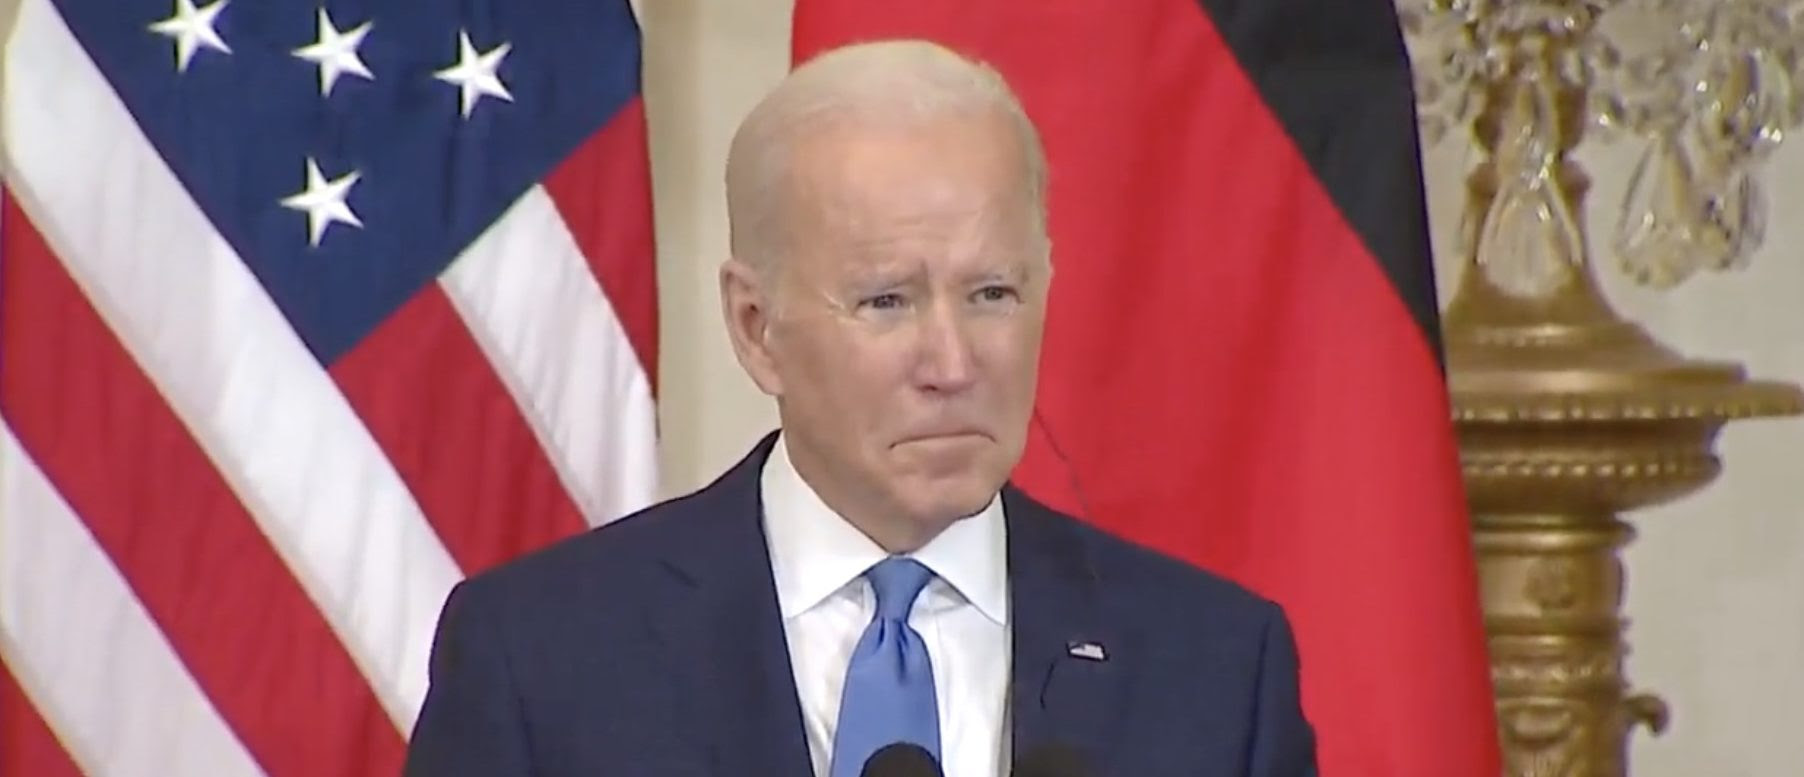 Biden Promises To Axe Nord Stream 2 If Russia Invades Ukraine But Won’t Explain How